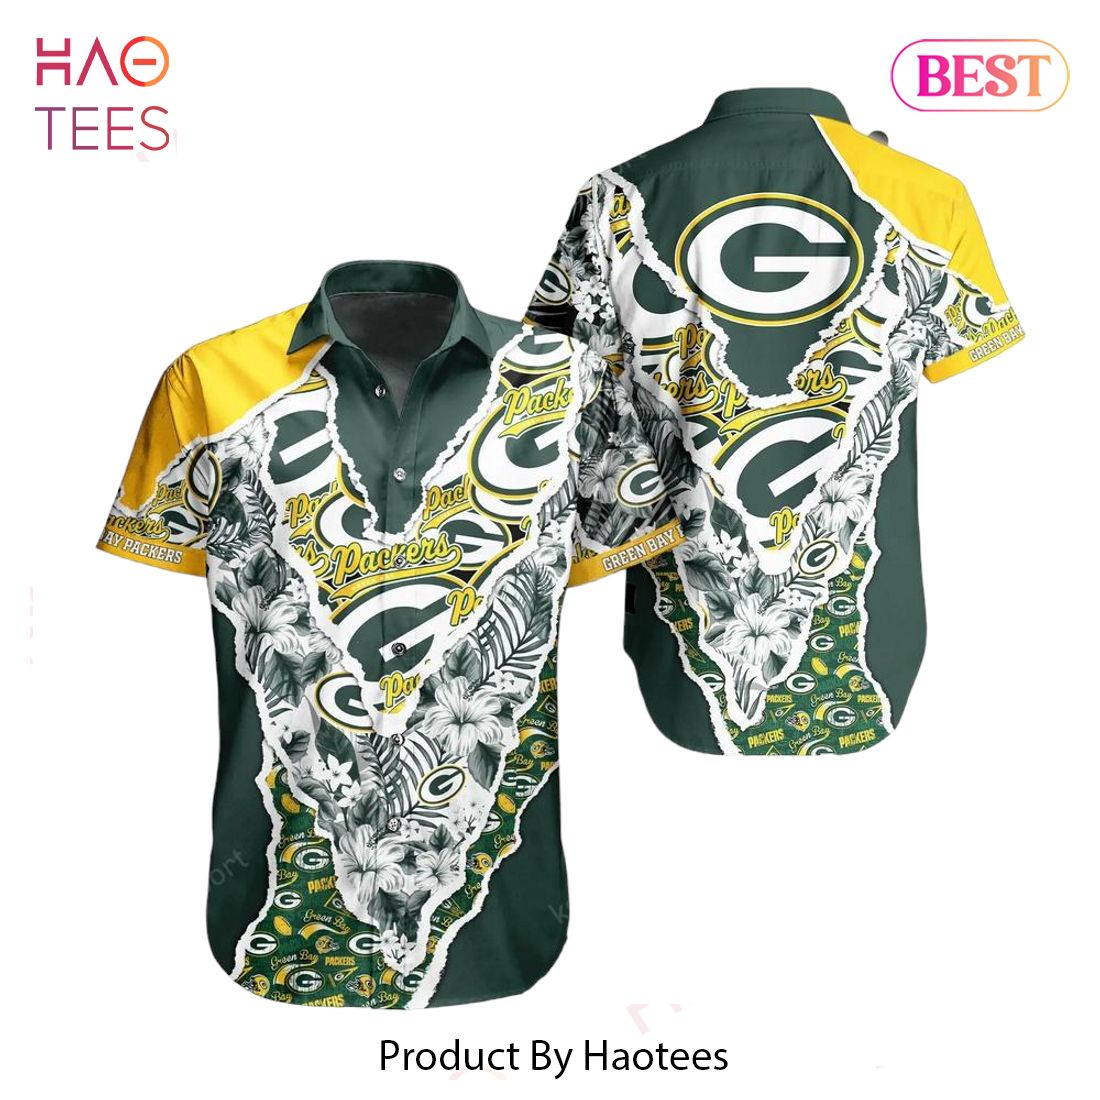 HOT TREND Green Bay Packers Nfl Hawaii Shirt Graphic Floral Pattern This Summer Meaningful Gifts For Fans